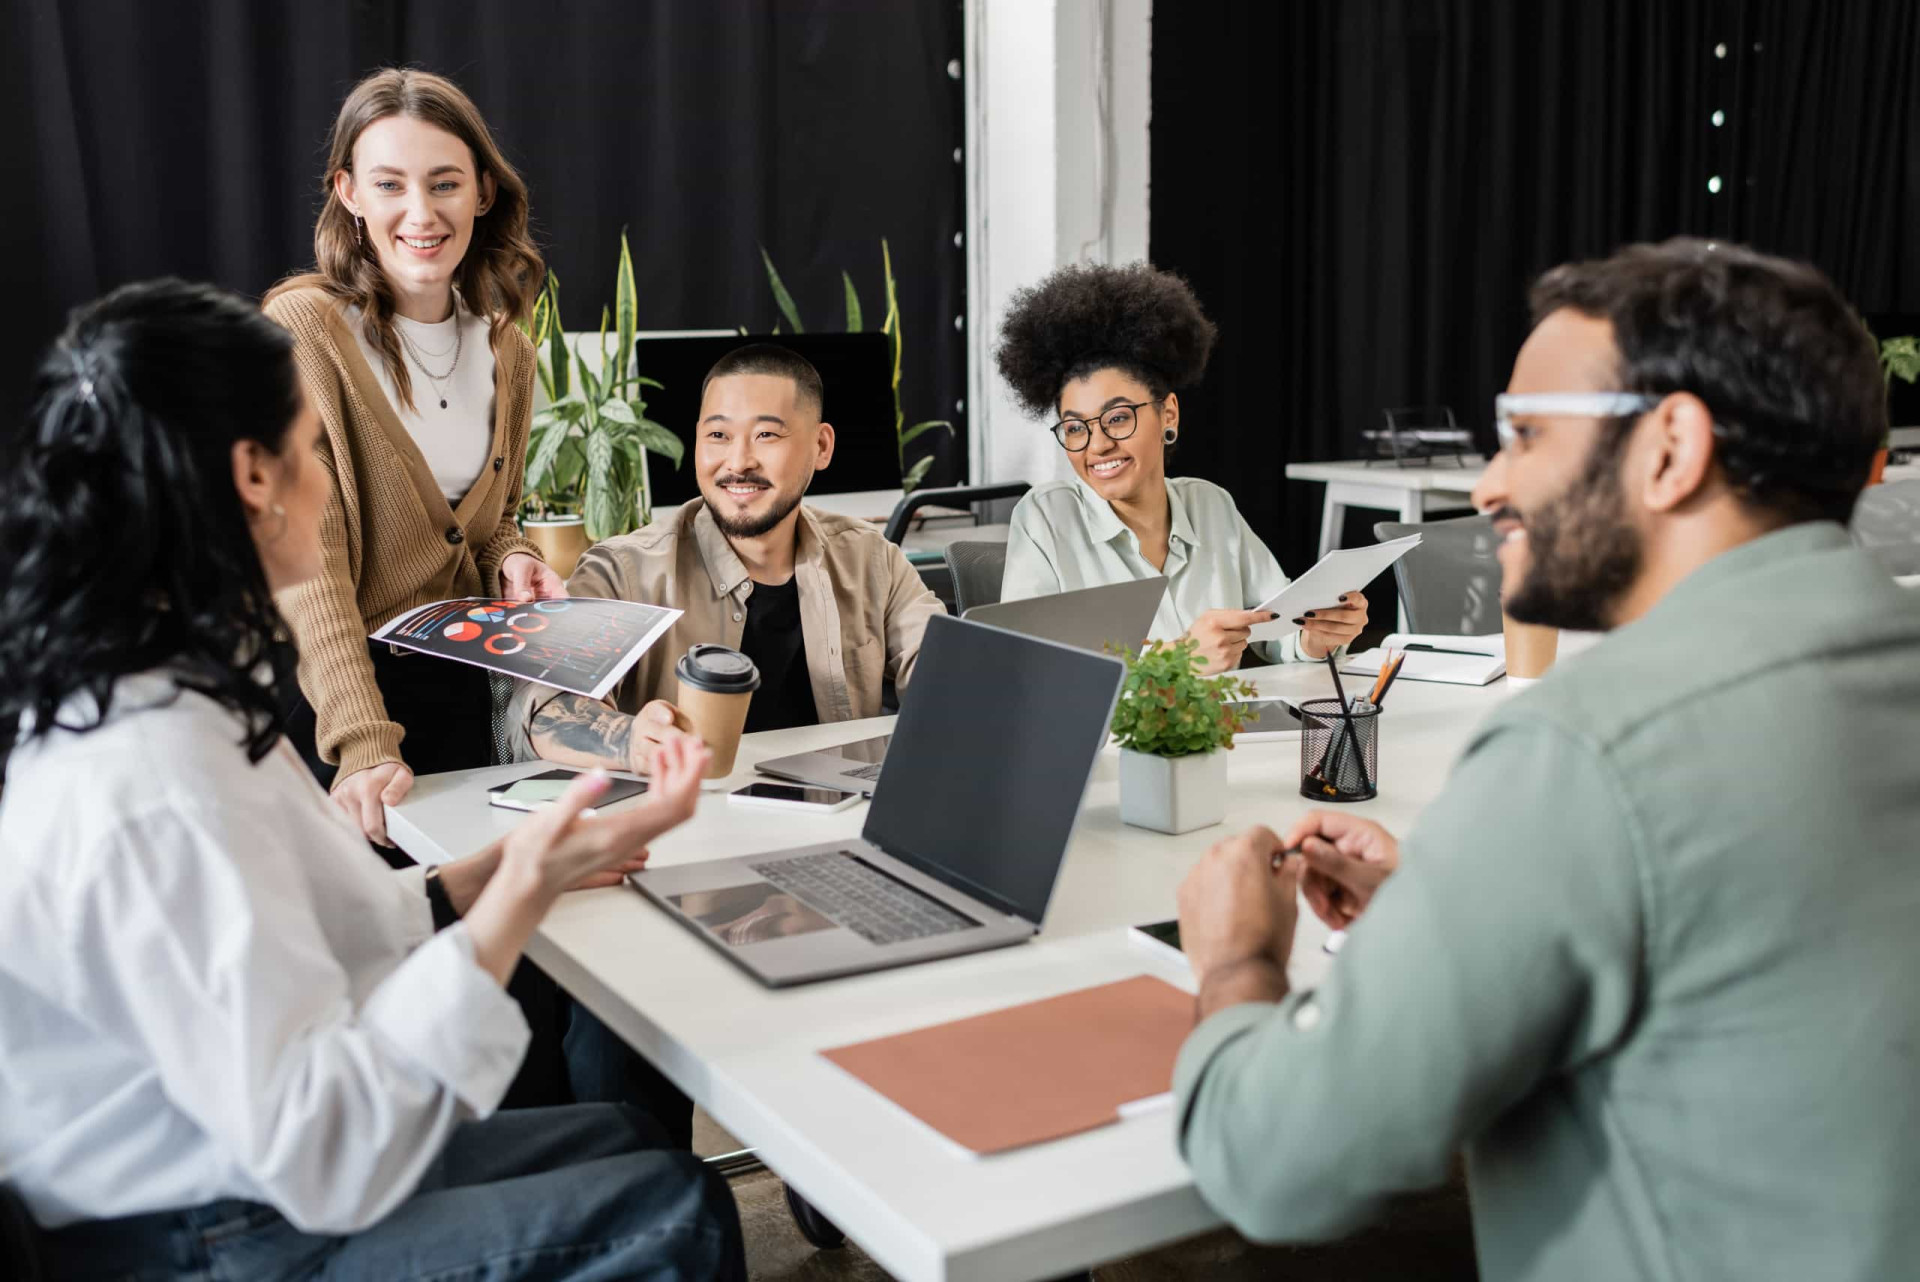 <p>Your team is the backbone. Cultivate a culture where every member feels valued and aligned with the mission. Fostering open communication and recognizing individual strengths create a powerhouse of collective innovation, propelling your business forward.</p><p>You may also like:<a href="https://www.starsinsider.com/n/392187?utm_source=msn.com&utm_medium=display&utm_campaign=referral_description&utm_content=616583en-us"> Mind-blowing photos of the unseen side of things</a></p>